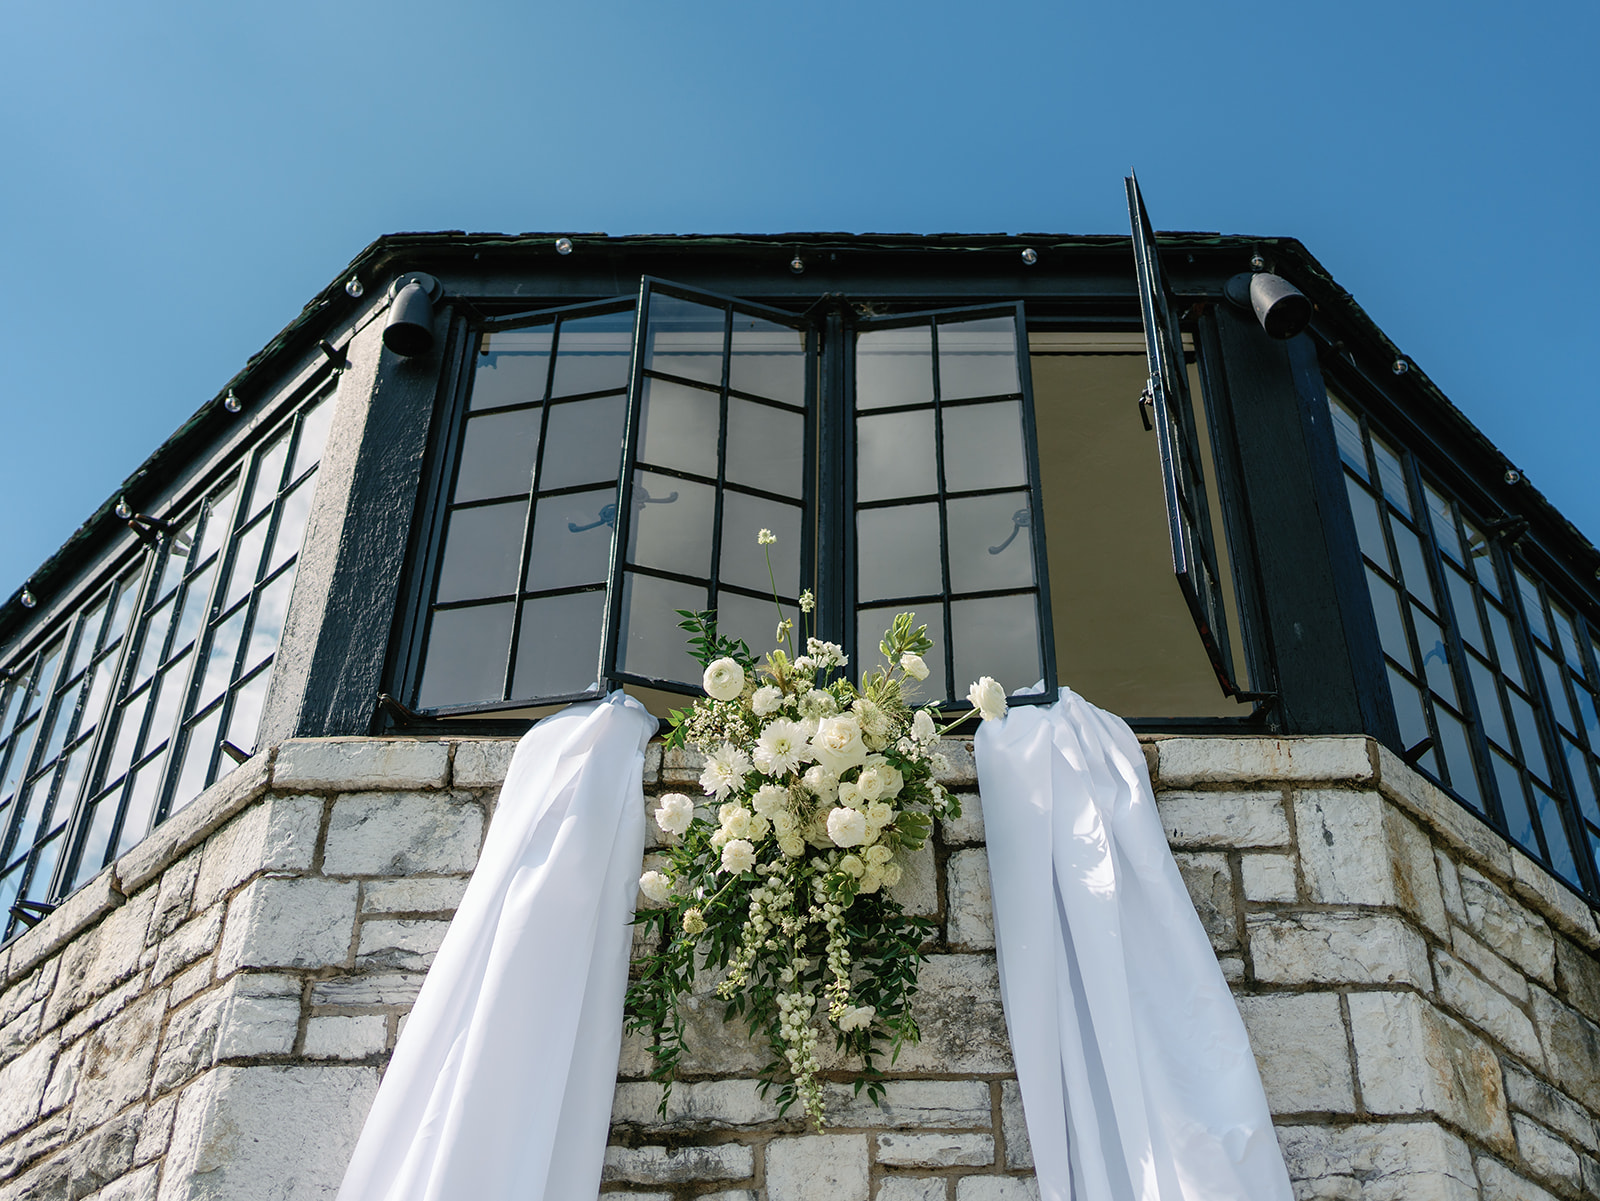 Details of a floral arrangement and white linens hanging out of a window at a Kincaid House Wedding